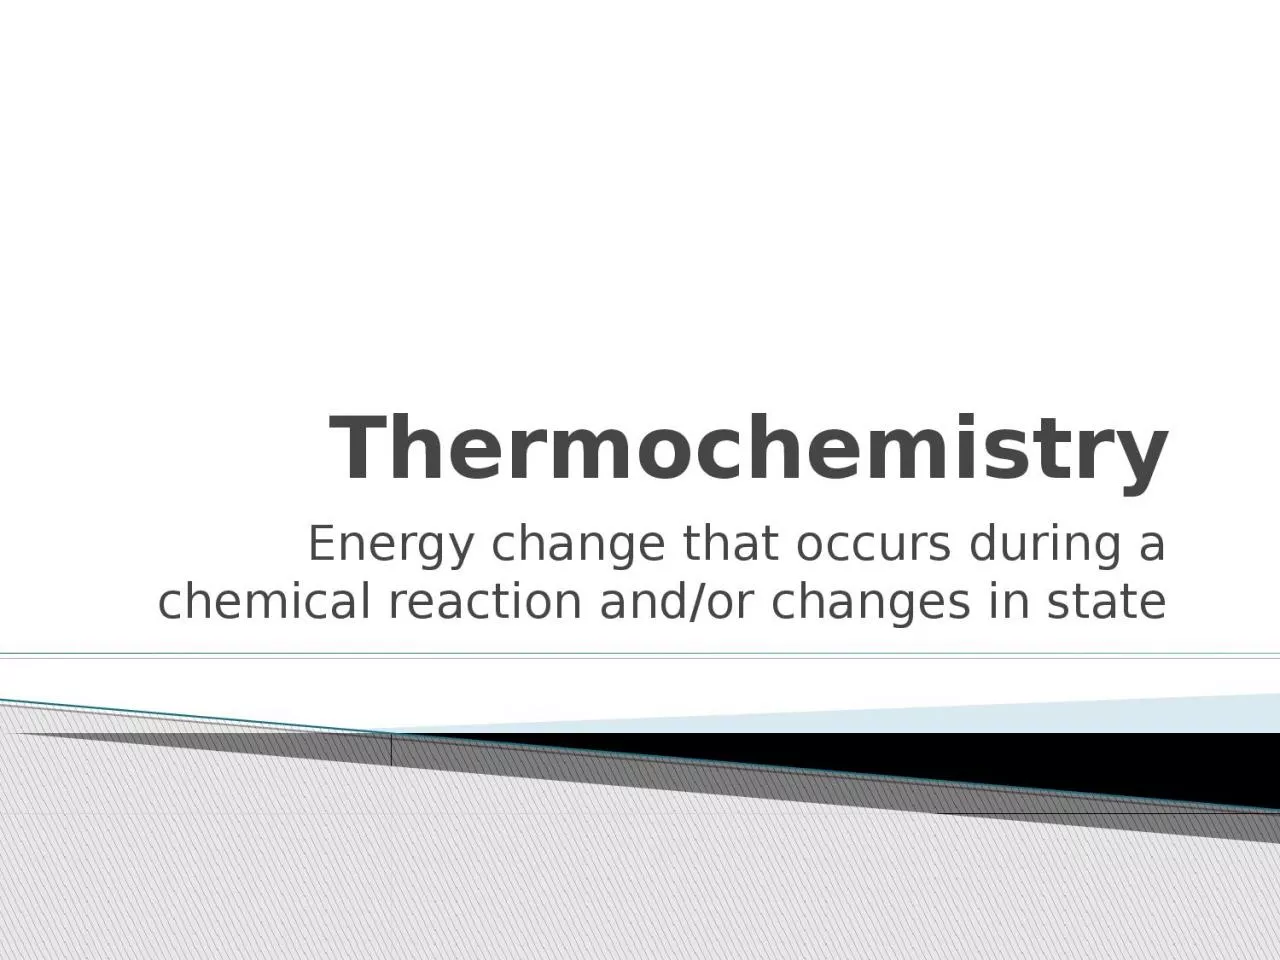 Thermochemistry Energy change that occurs during a chemical reaction and/or changes in